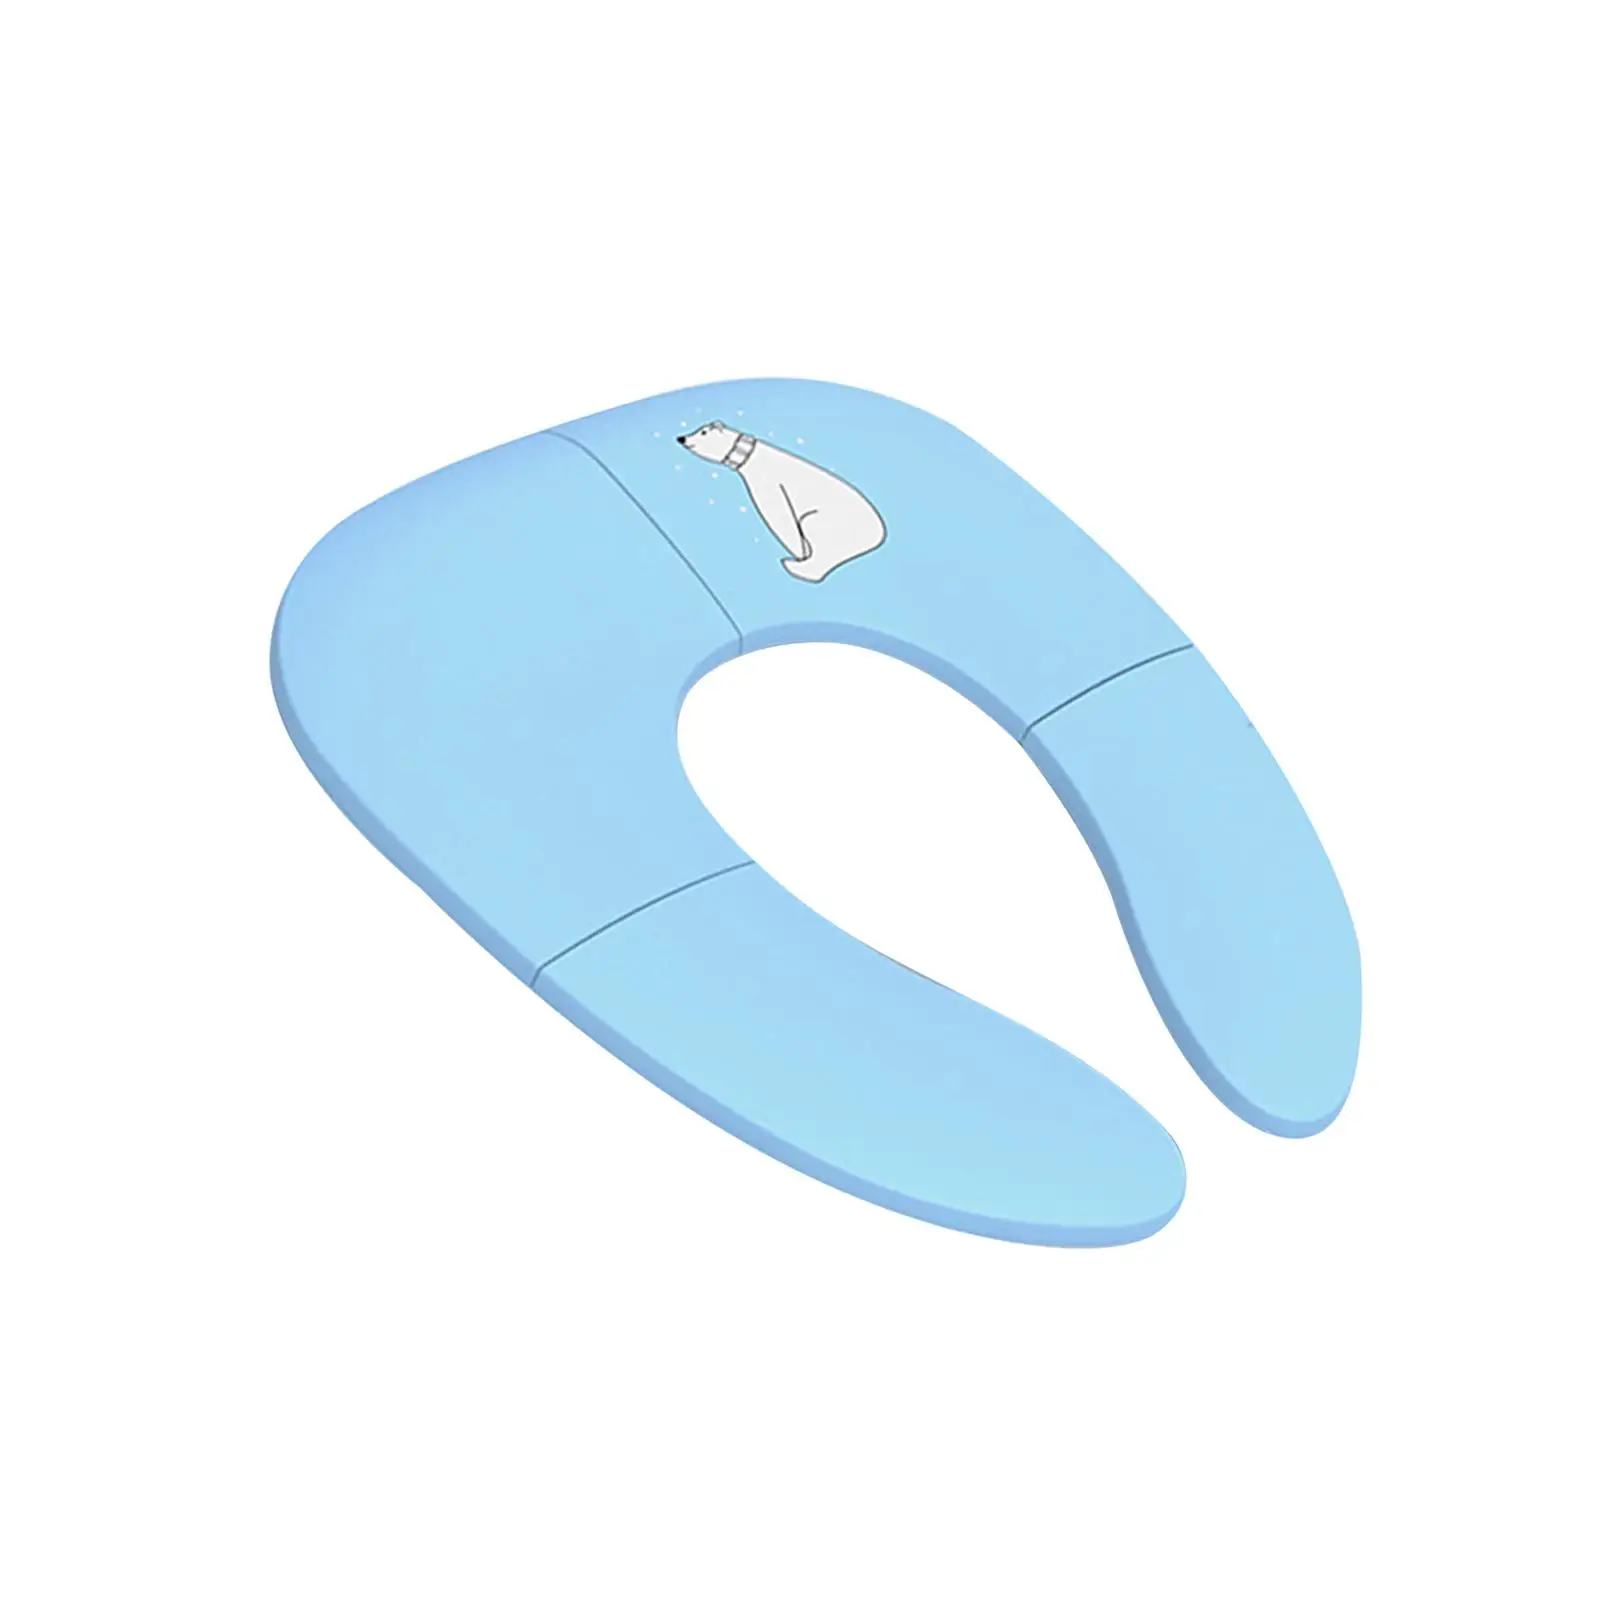 Foldable Toilet Seat Potty Ring Toilet pad for Travel Toddler Girls Kids Child